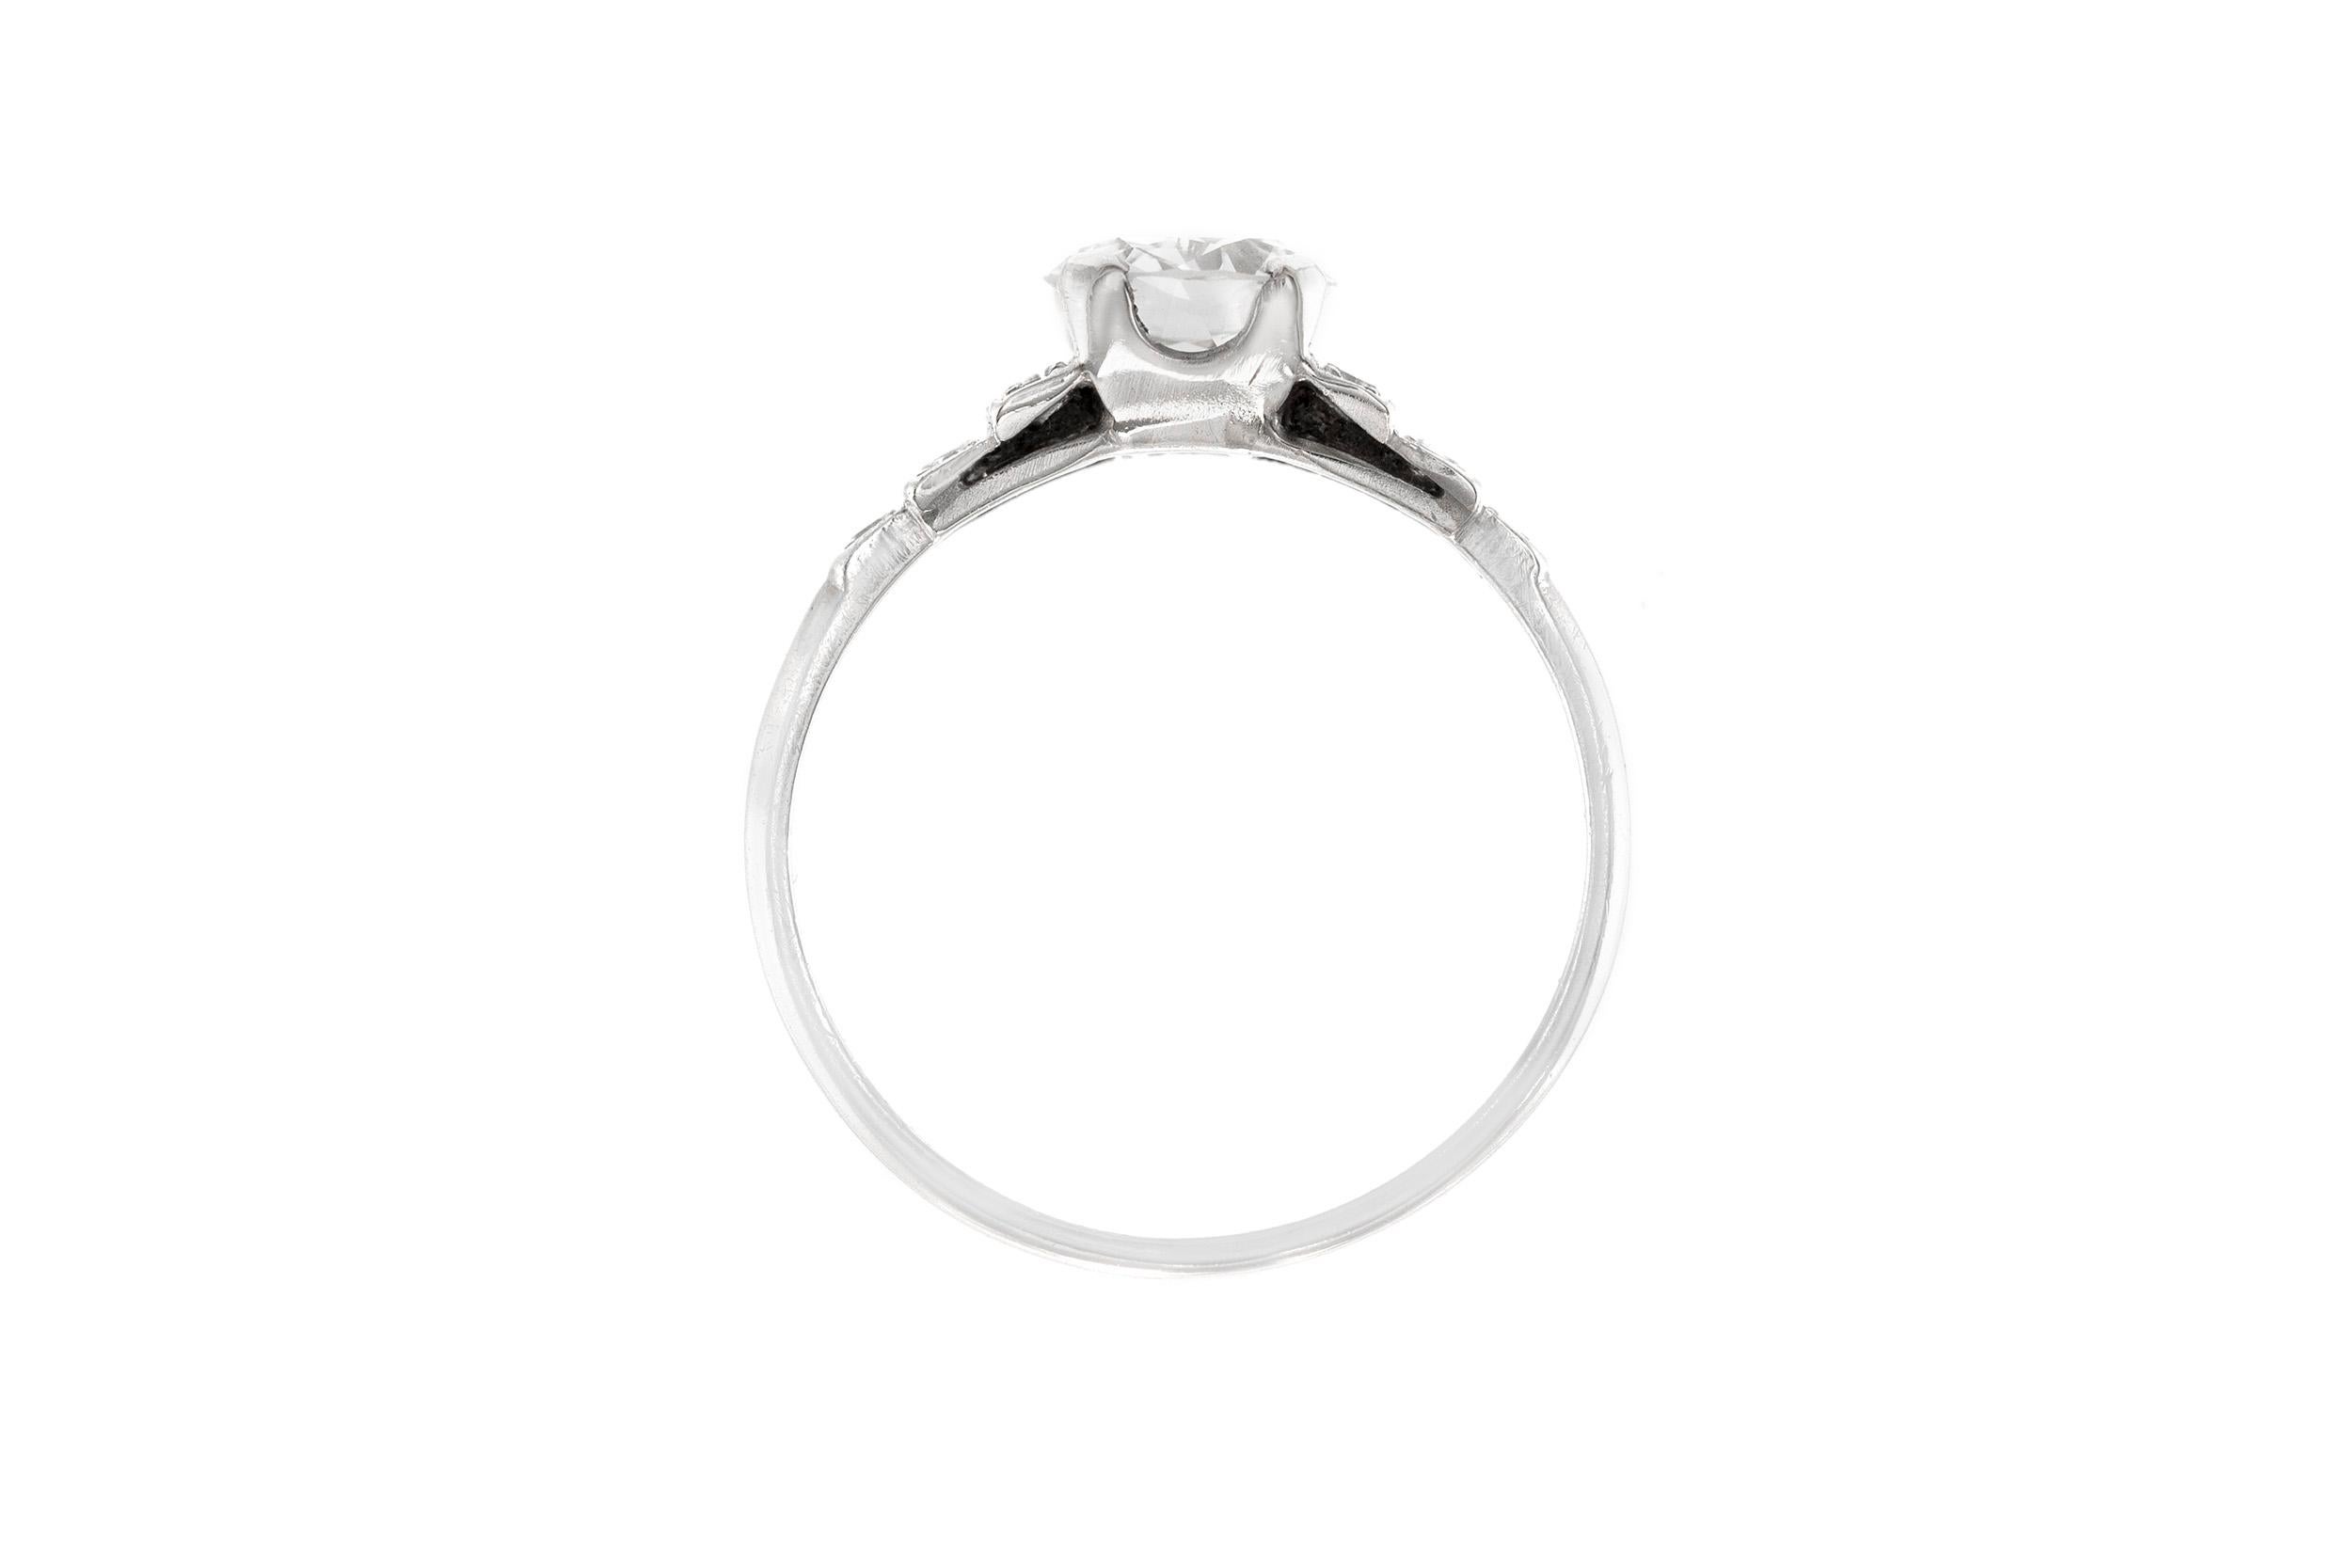 The beautiful ring is finely crafted in platinum with center diamond weighing approximately total of 1.09 carat and GIA cert .
Color H     Clarity VS2
All around diamond weighing approximately total of 0.3 carat.
Circa 1930
Easy to resize